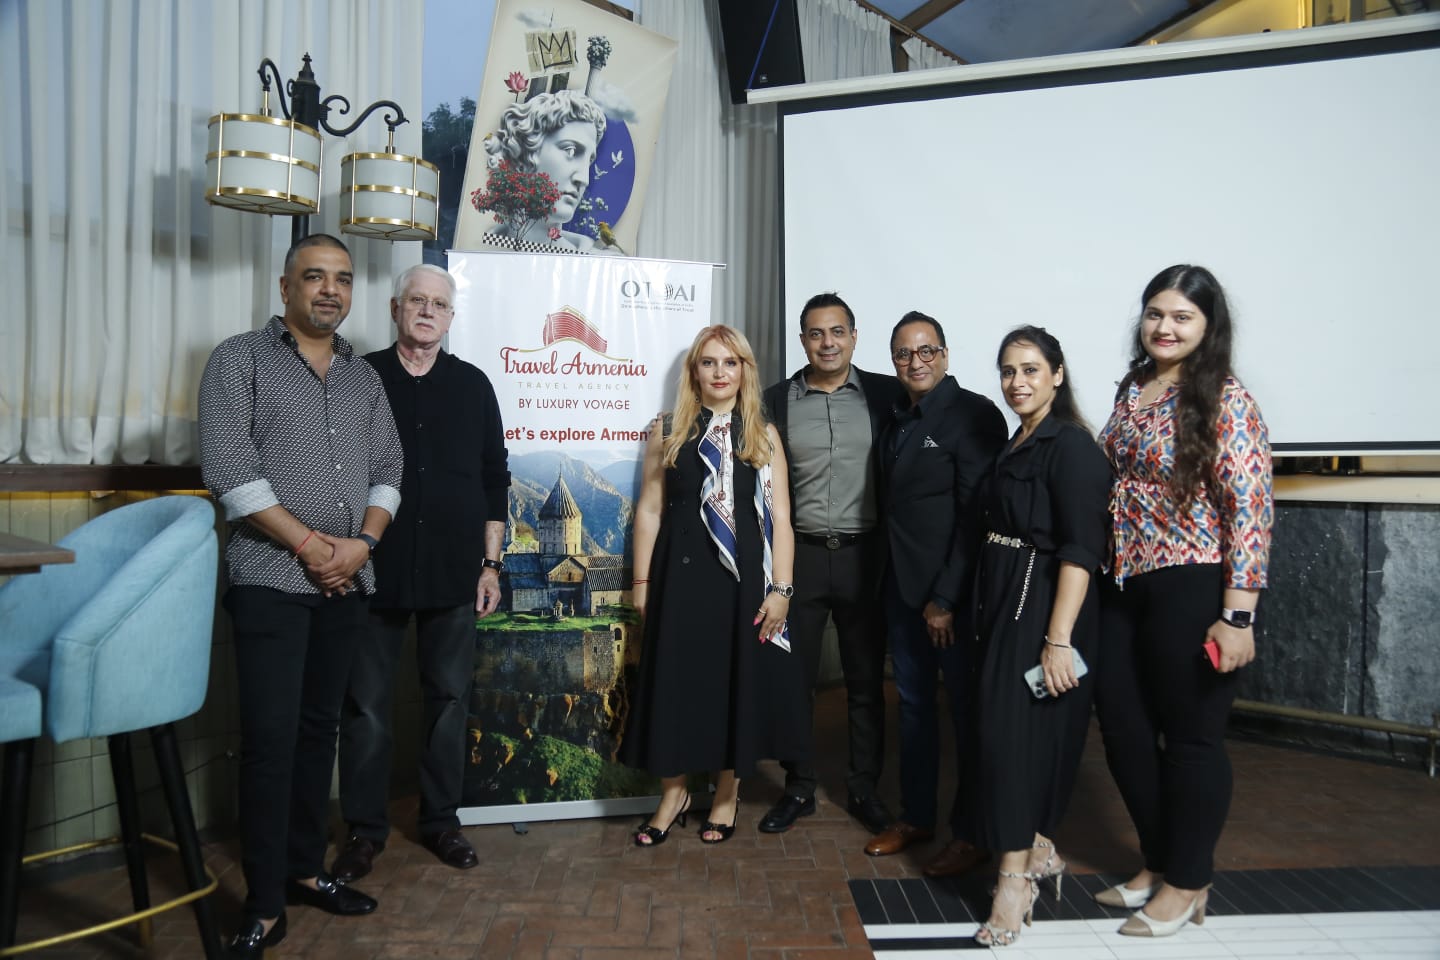 OTOAI partners with Travel Armenia to promote the country as a key destination